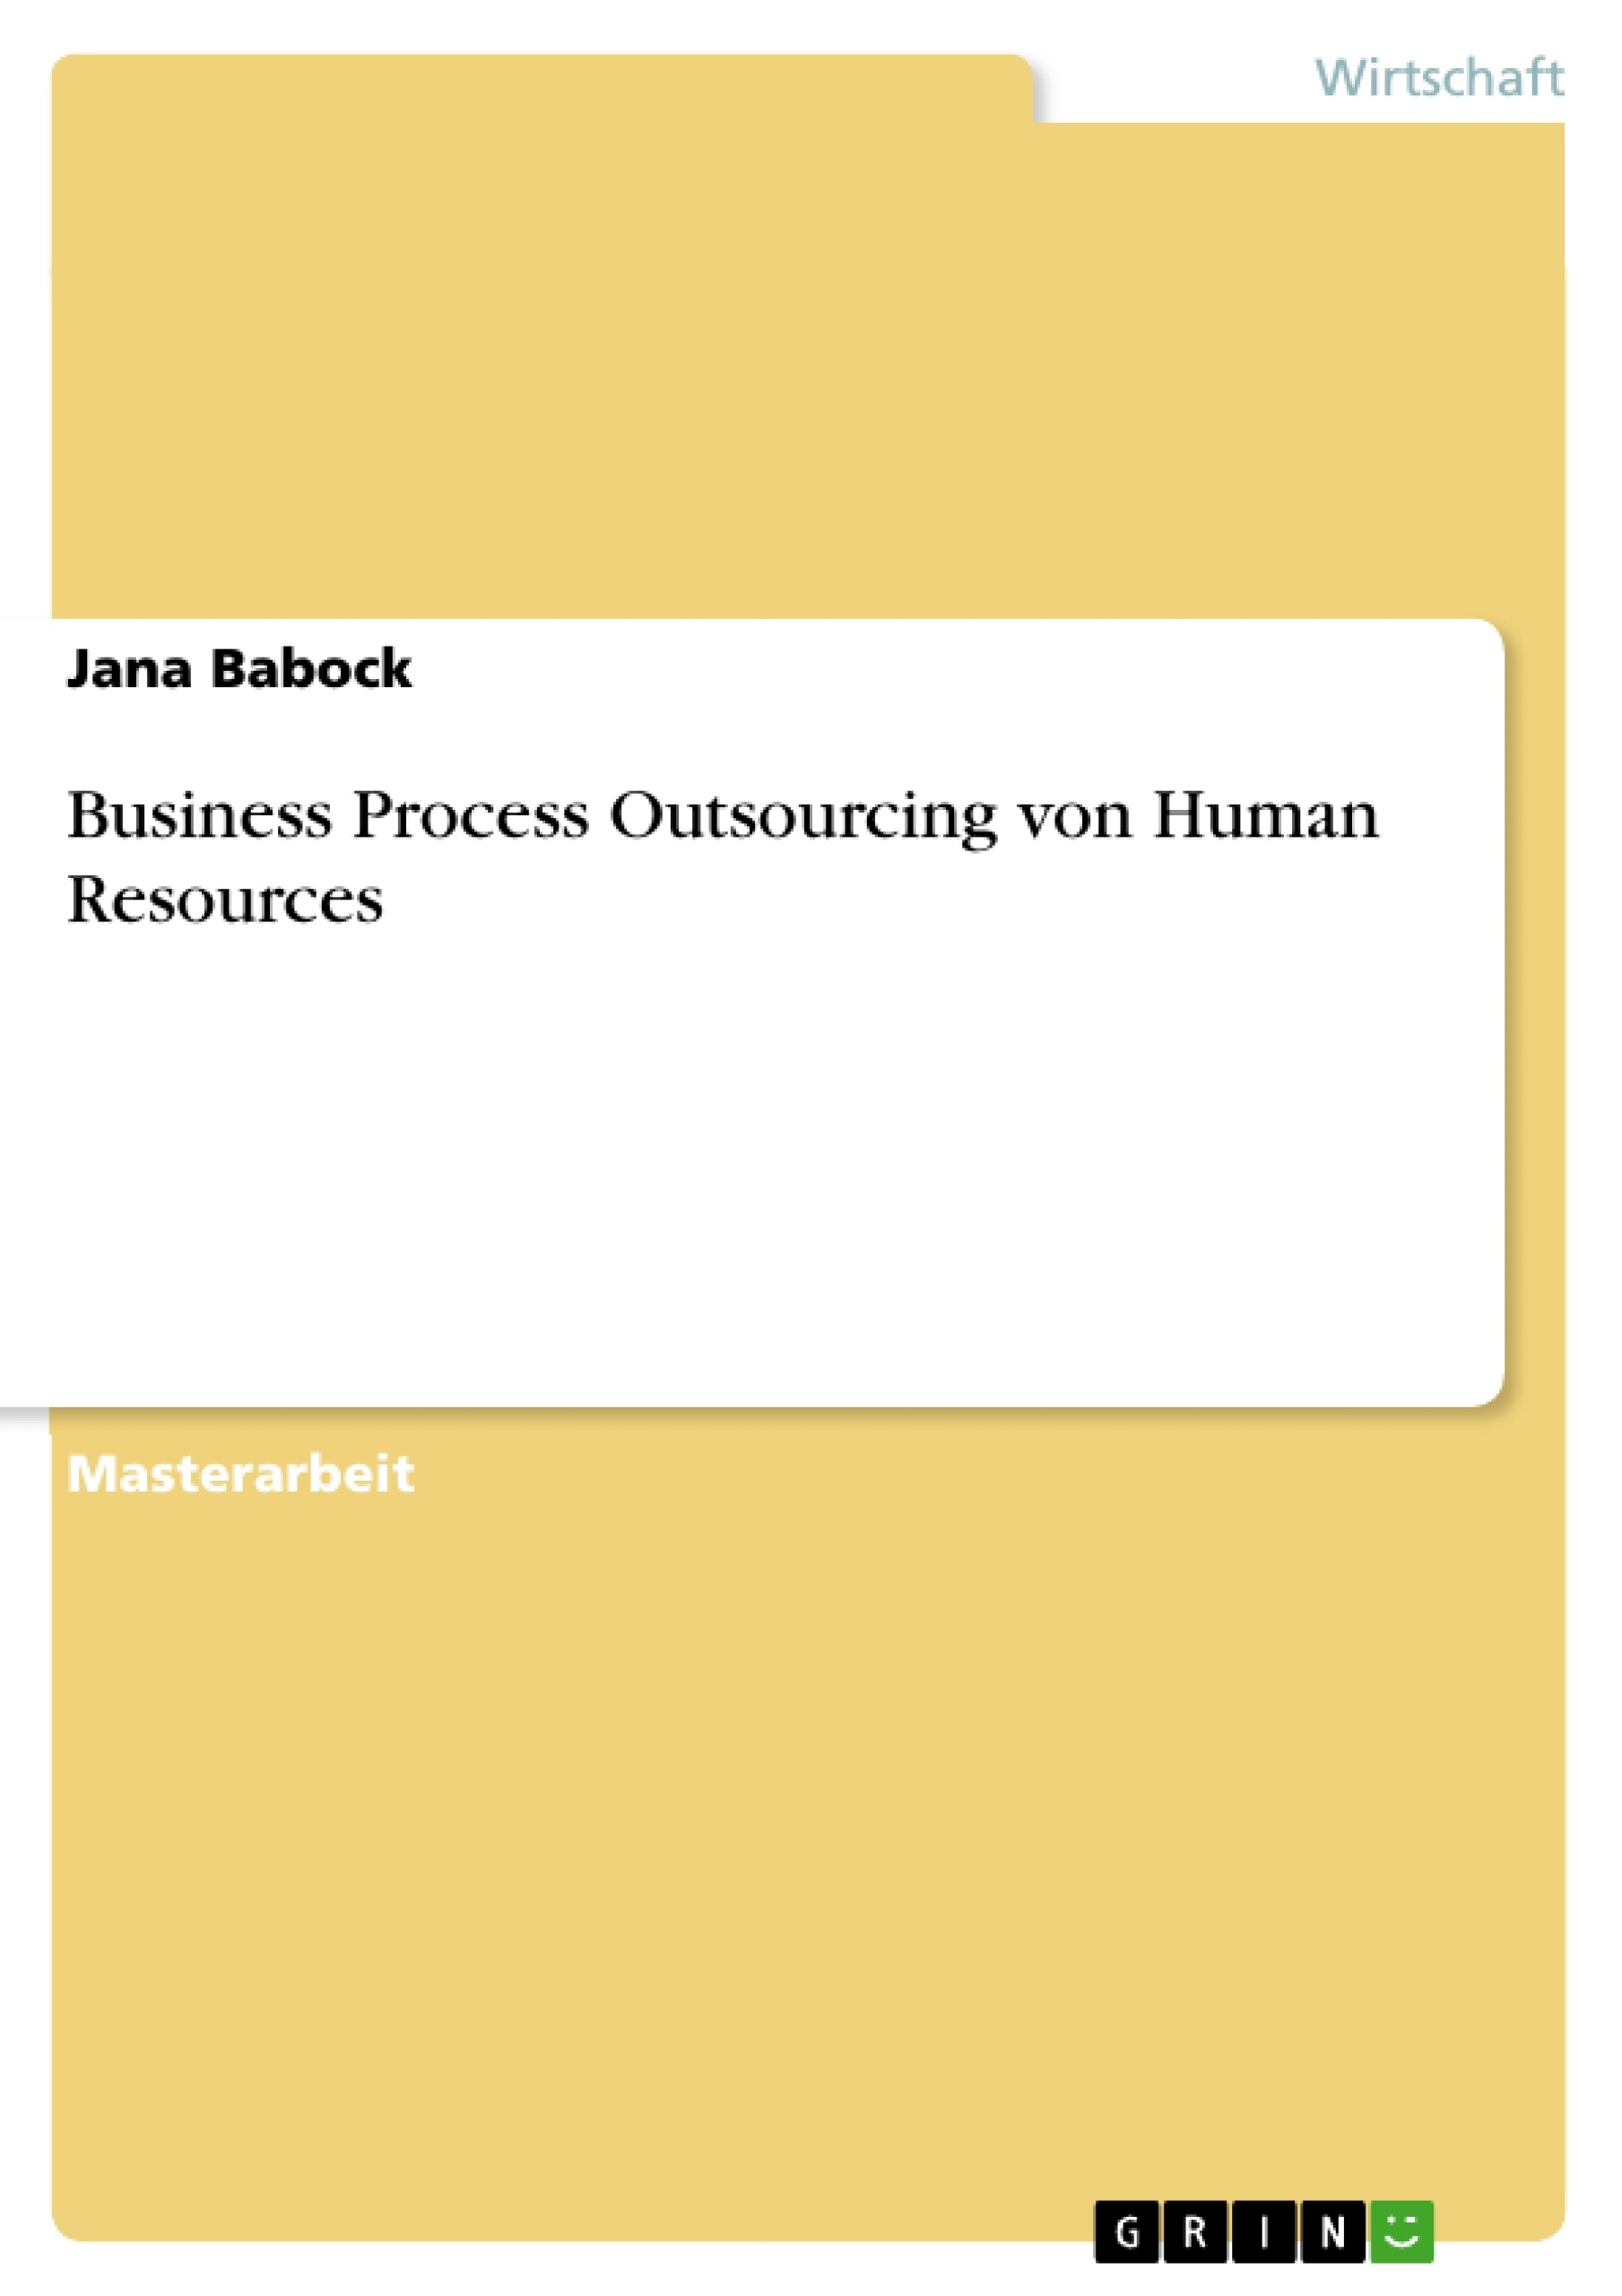 Título: Business Process Outsourcing von Human Resources